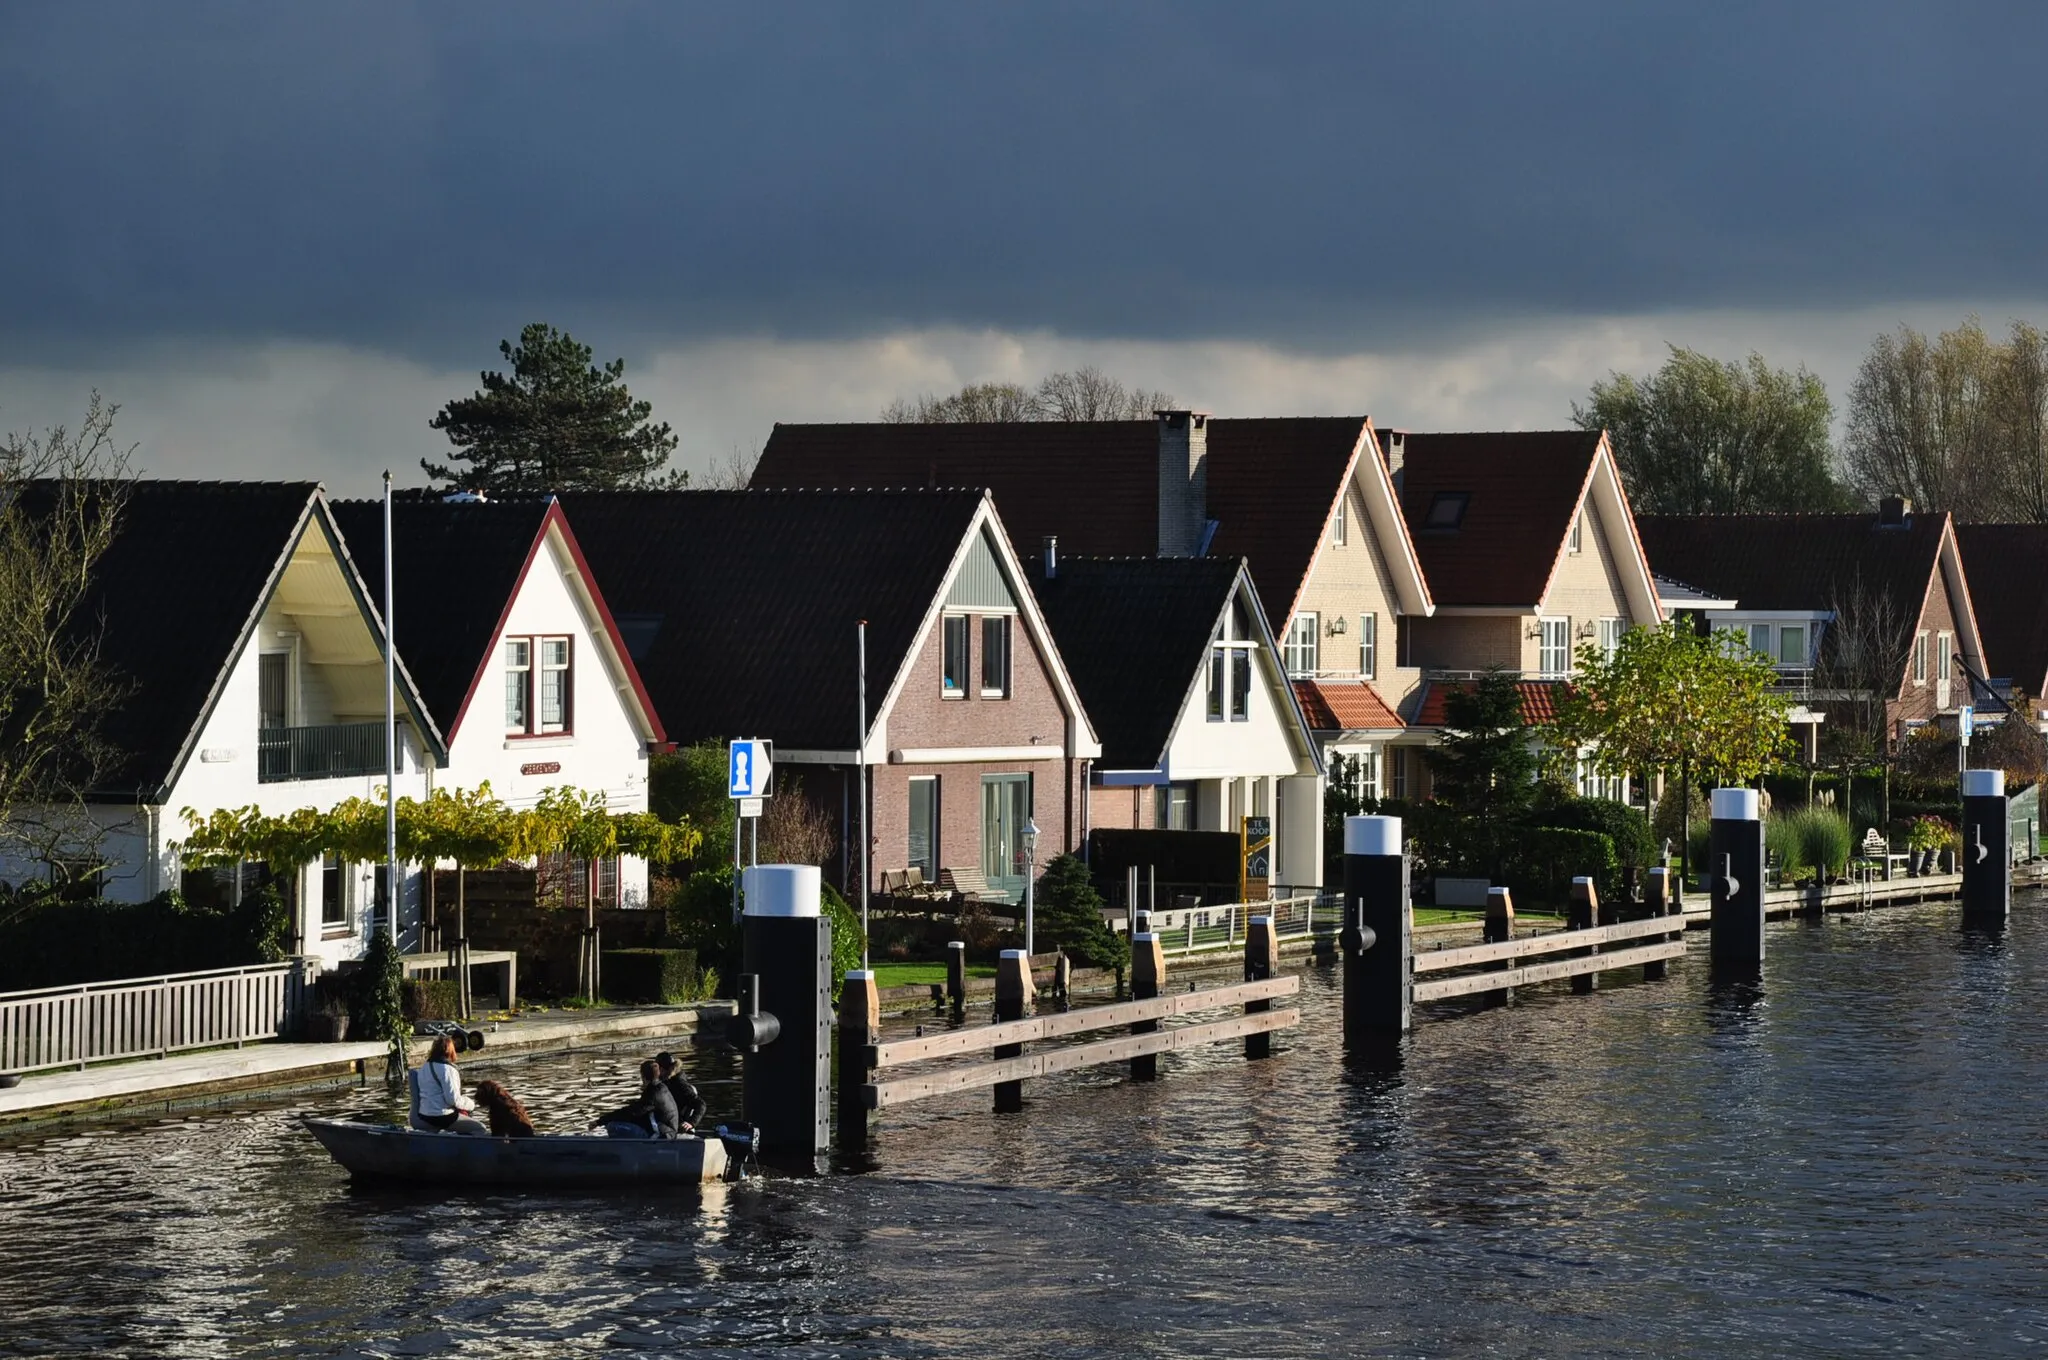 Photo showing: Houses on the Woudwetering canal in Woubrugge (municipality Kaag en Braassem, Province South Holland, Netherlands).